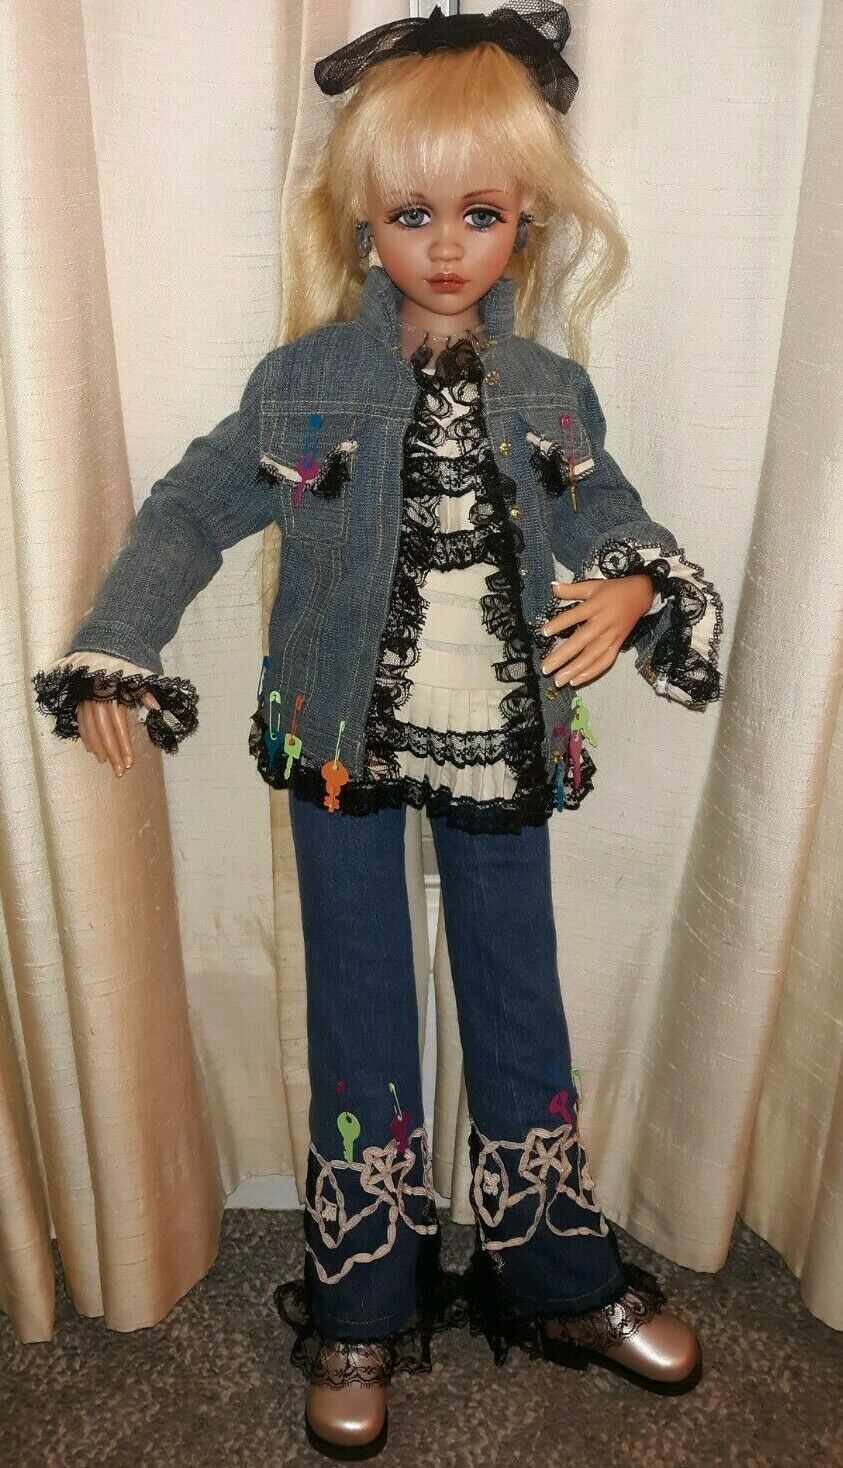 Jan Mclean Artist Doll Groovy Outfit 30" All Orig. #364 Of #494 ?kiss $199.99